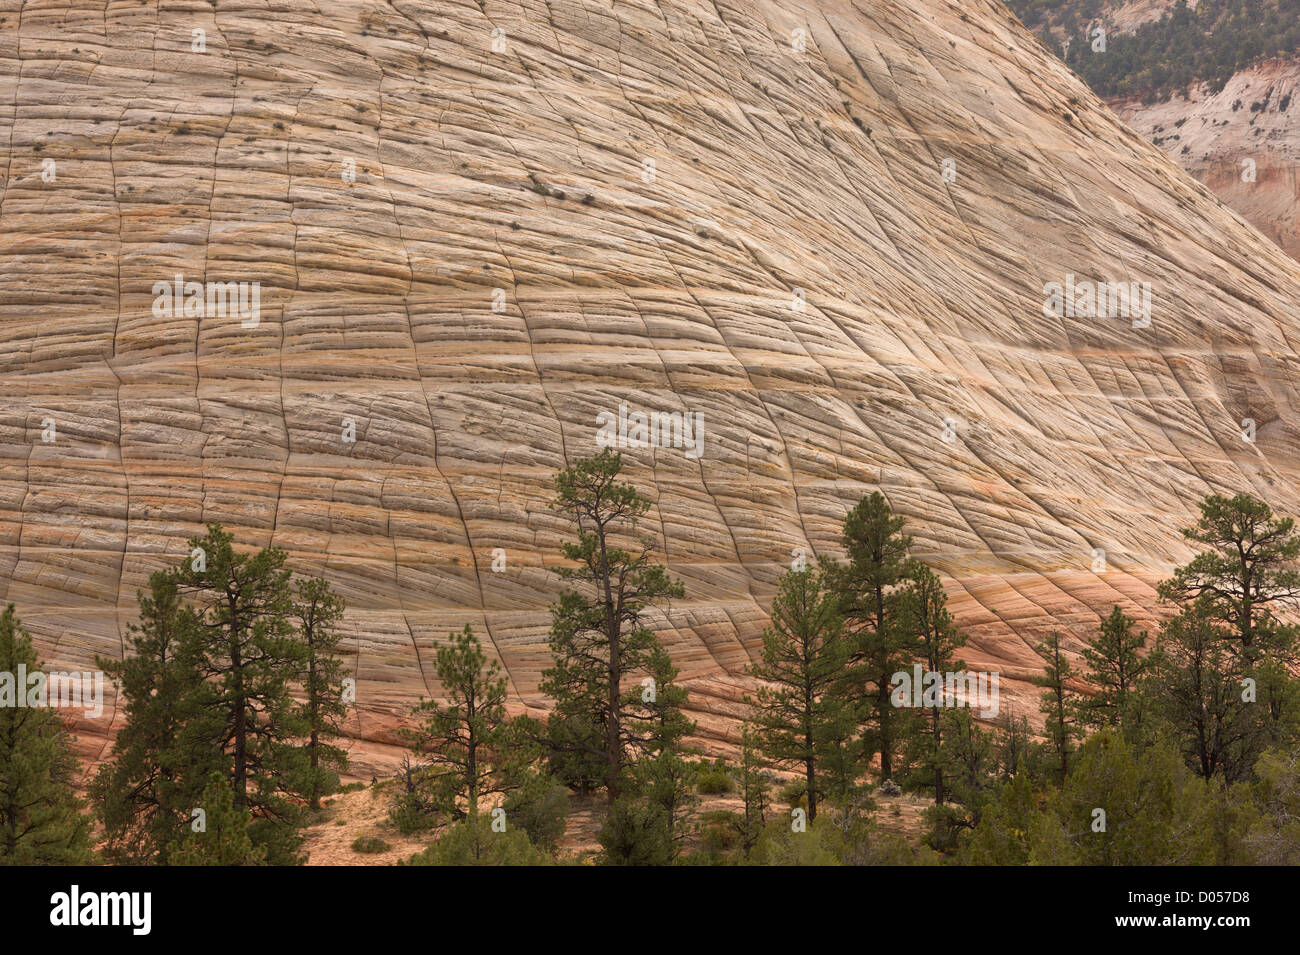 Checkerboard Mesa, showing both cross-bedding and vertical stress and erosion fractures, Zion National Park, Utah, USA Stock Photo